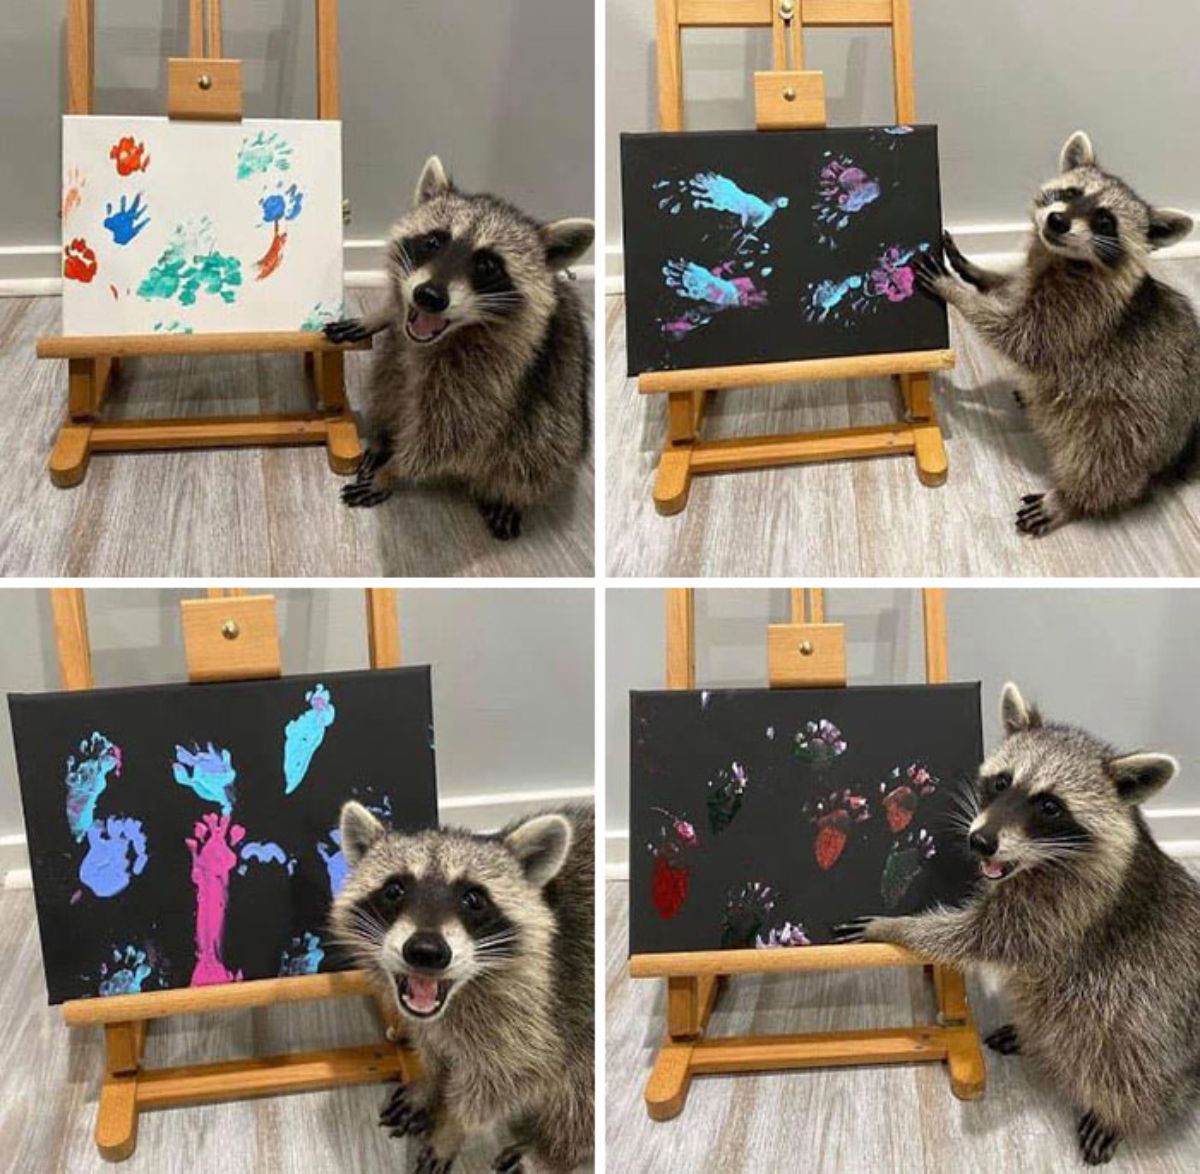 4 photos of a raccoon standing next to canvas paintings on easels of colourful paw prints